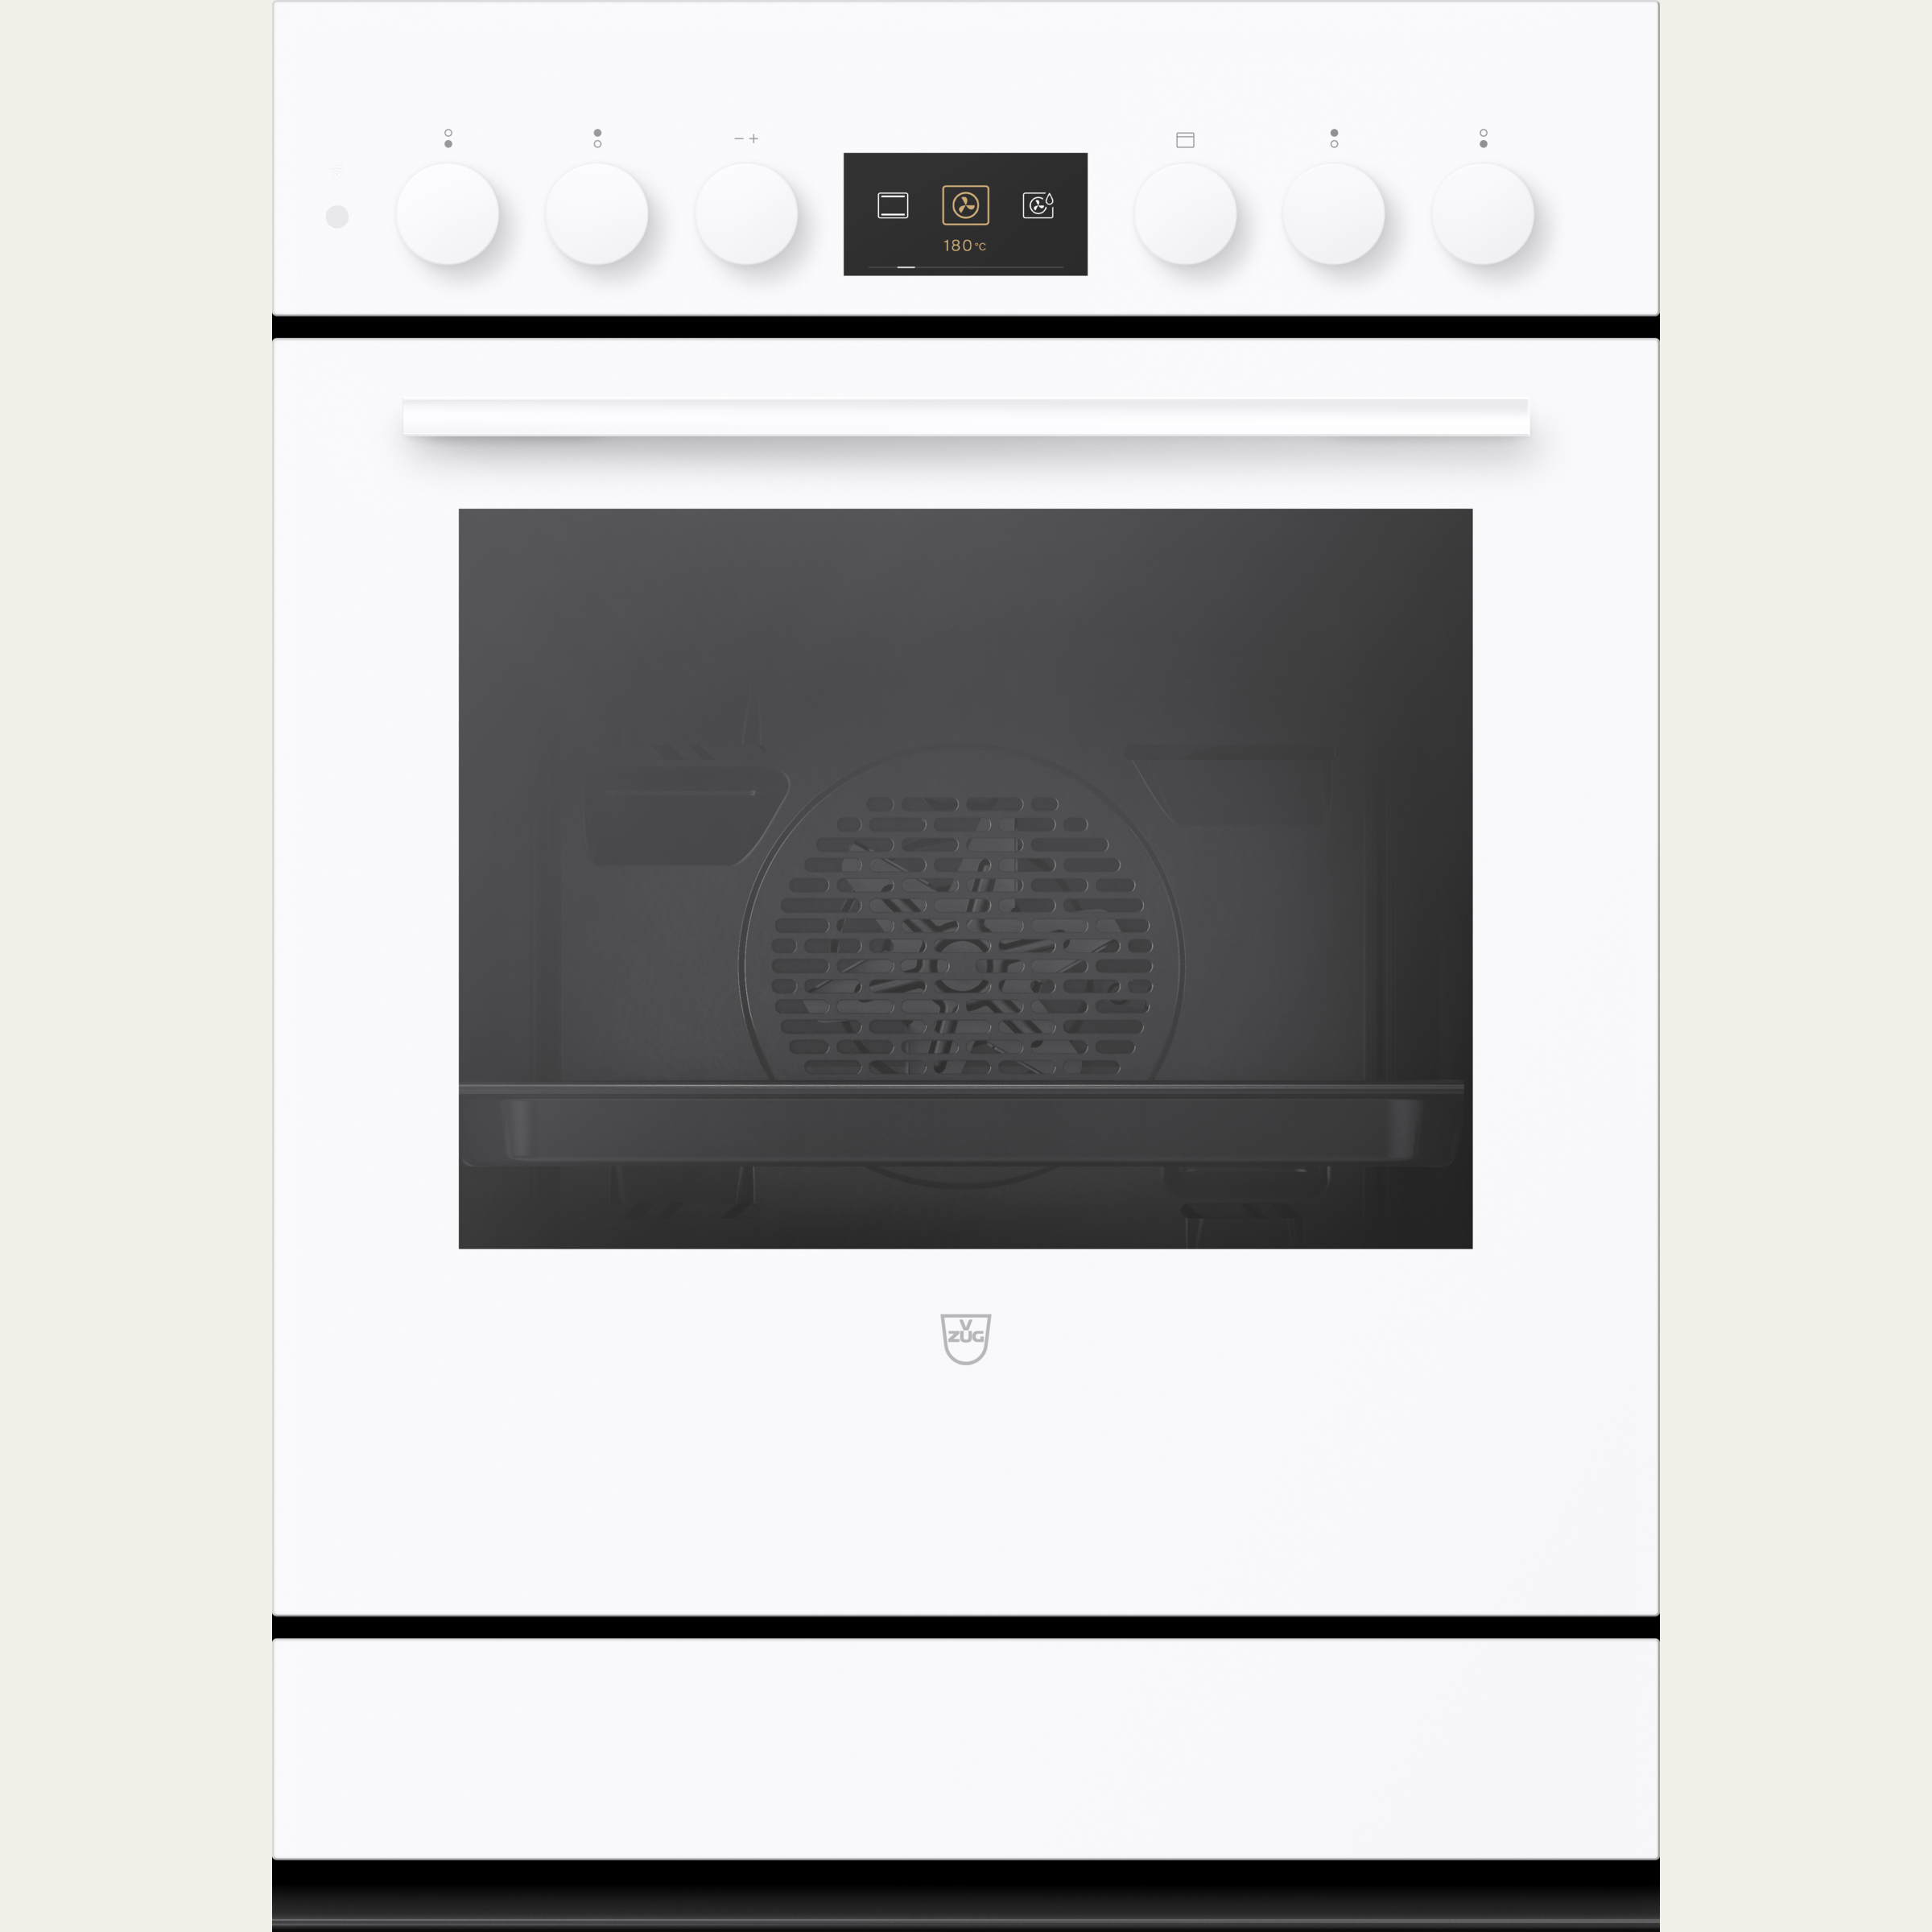 V-ZUG Cooker Combair V600 7UHC, Standard width: 55 cm, Standard height: 76.2 cm, White with glass, Handle: white, dial, V-ZUG-Home, Heatable appliance drawer, Number of controllable cooking zones: 4, 400V